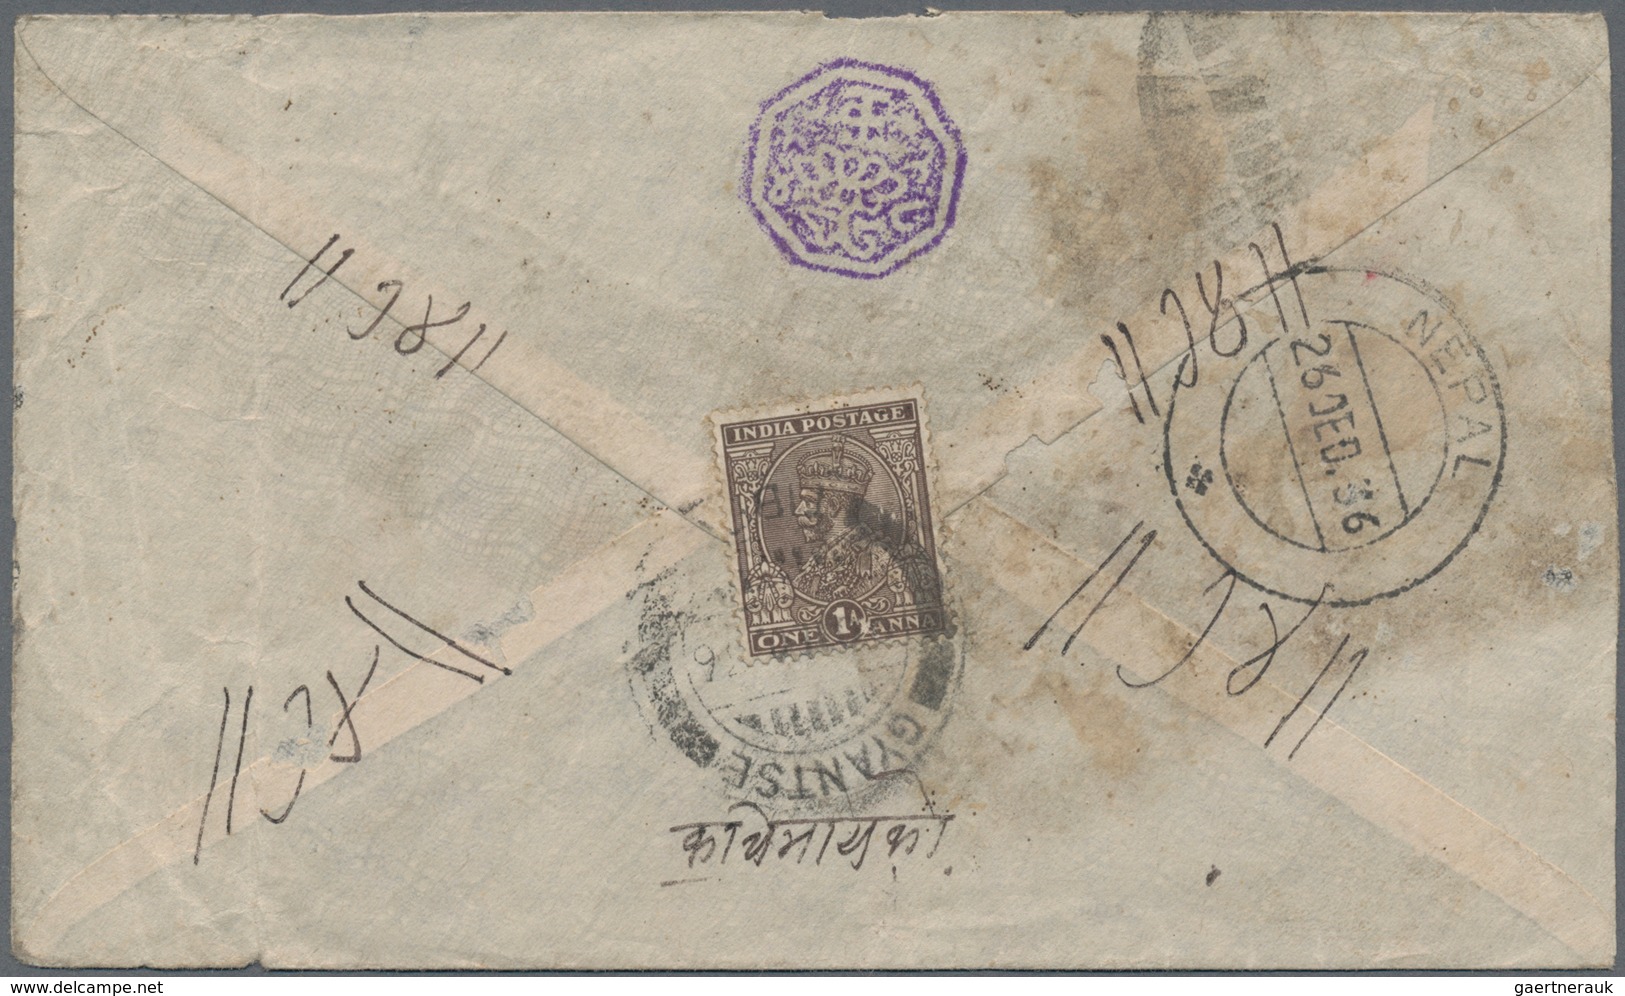 Tibet: 1919/36, India p.o. in Tibet, covers (5) all to Nepal with "Siliguri base office 4 FE 19", ot